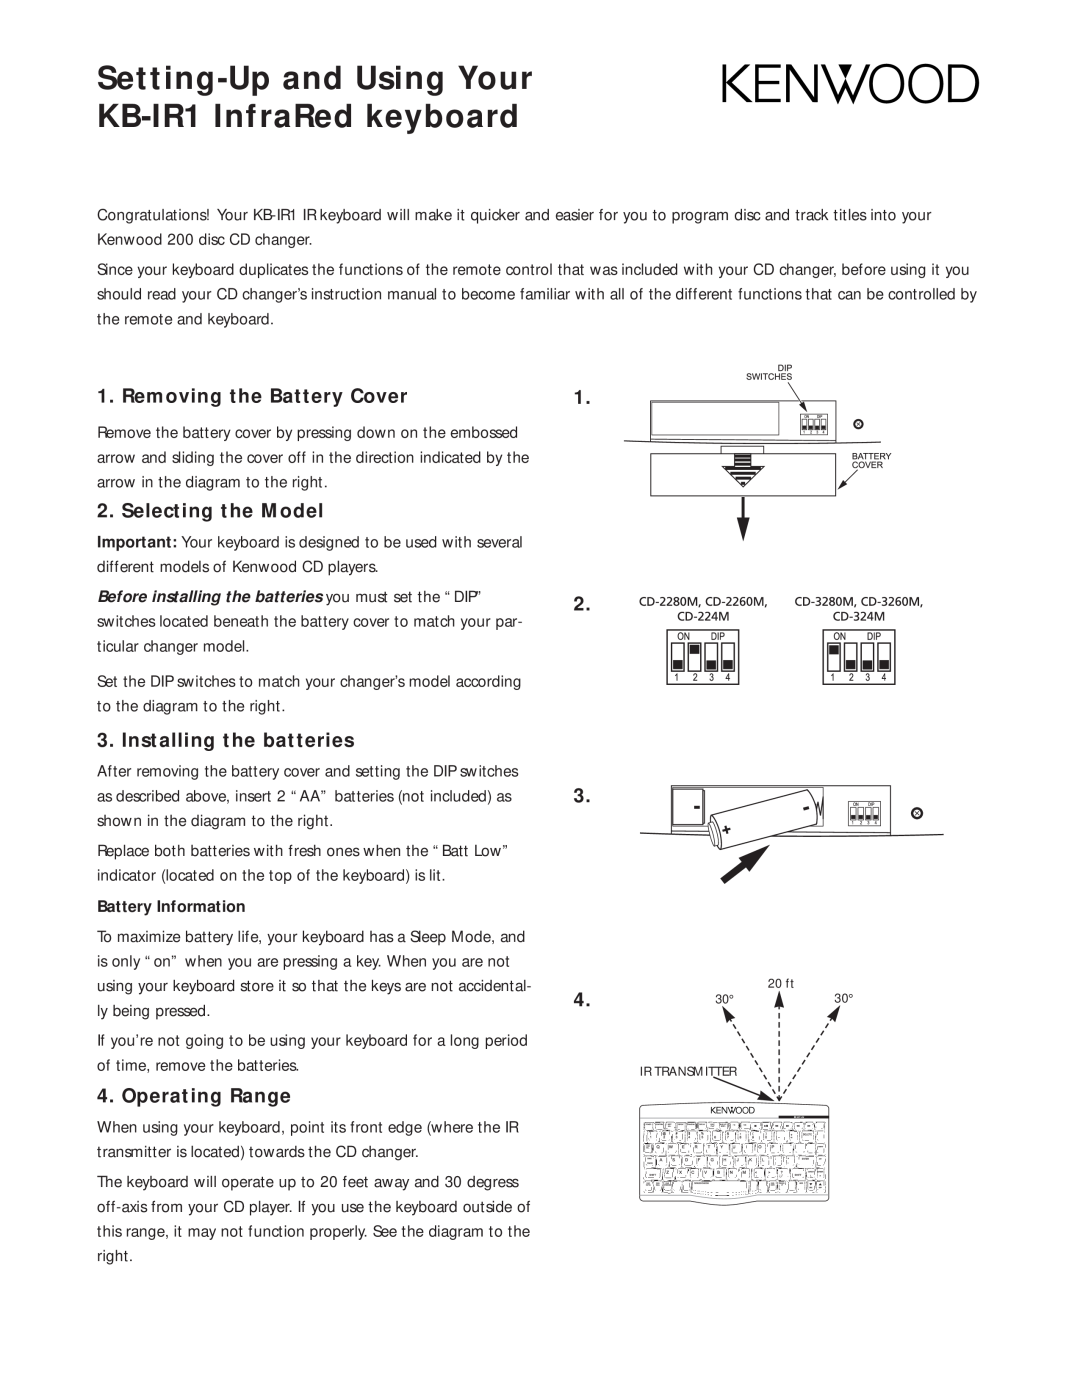 Kenwood KB-IR1 instruction manual Removing the Battery Cover, Selecting the Model, Installing the batteries 